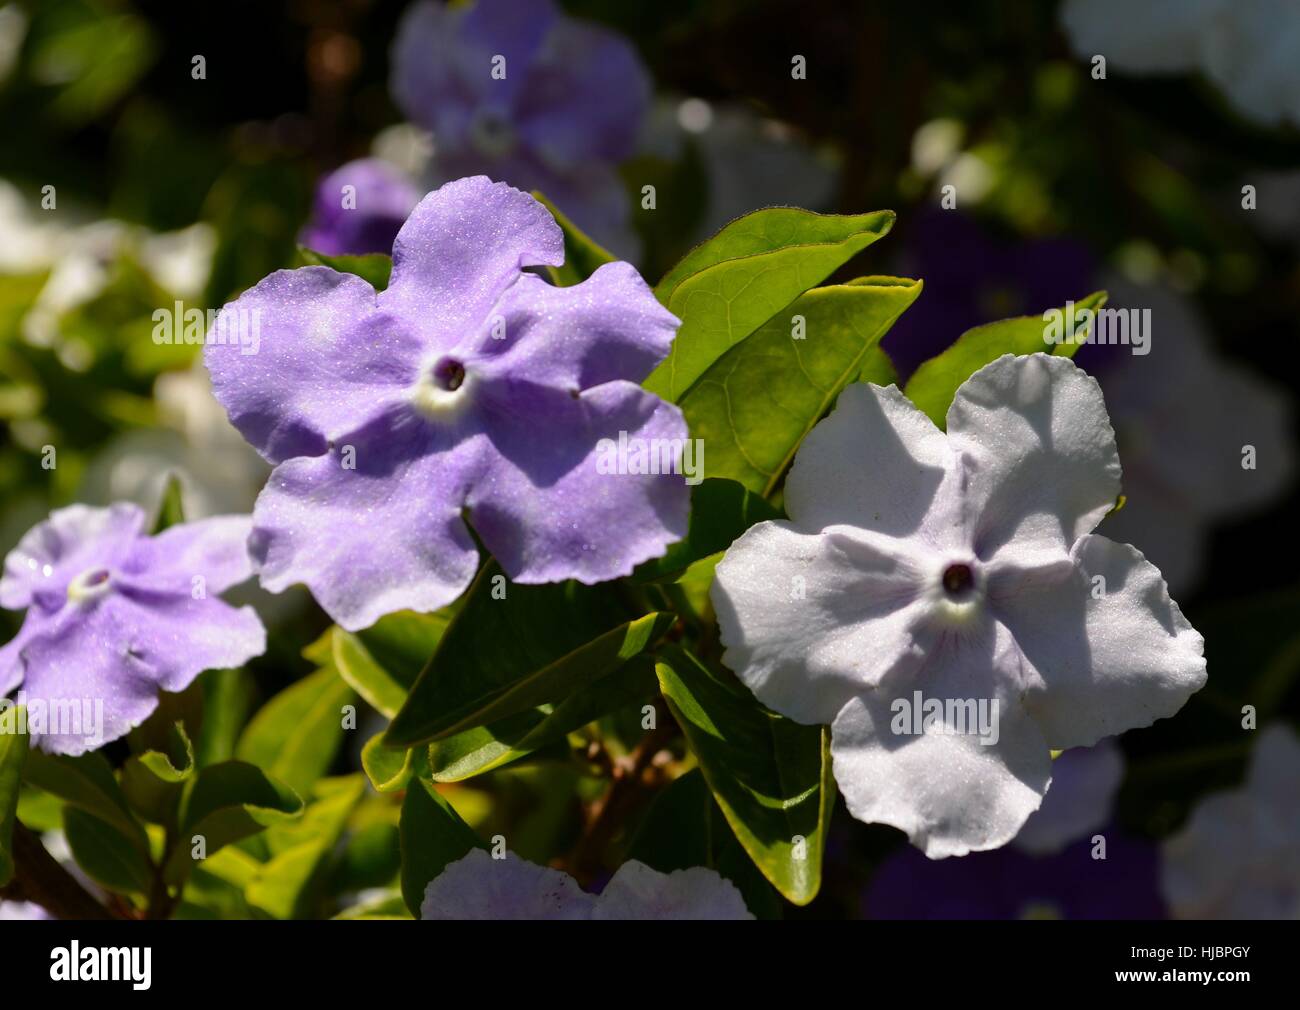 Plant in bloom with pale purple and white flowers Stock Photo